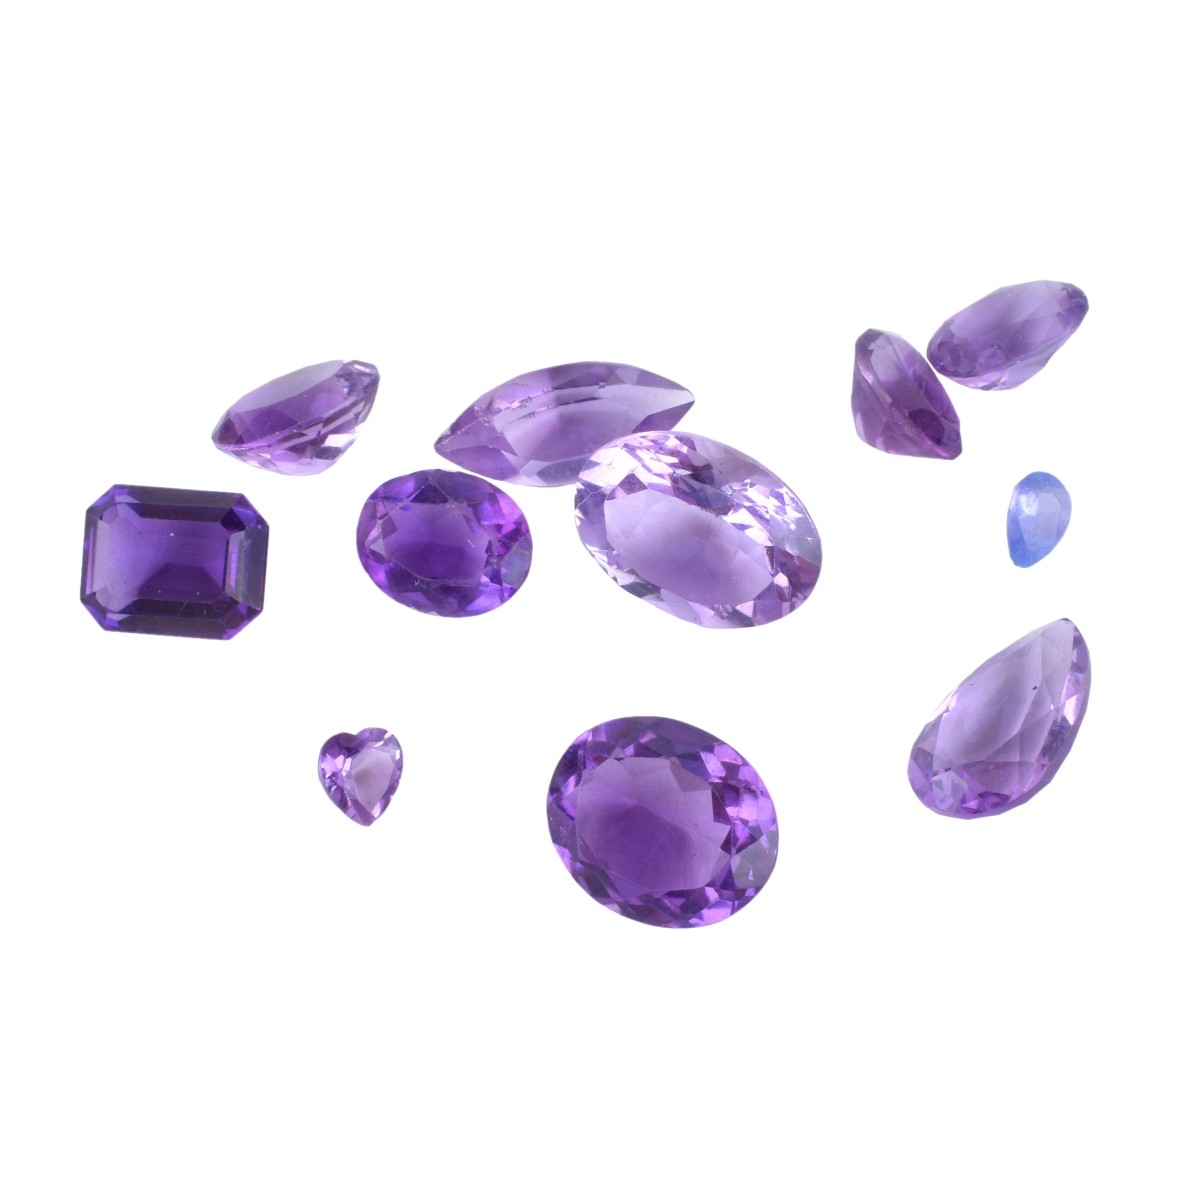 Collection of Loose Amethyst